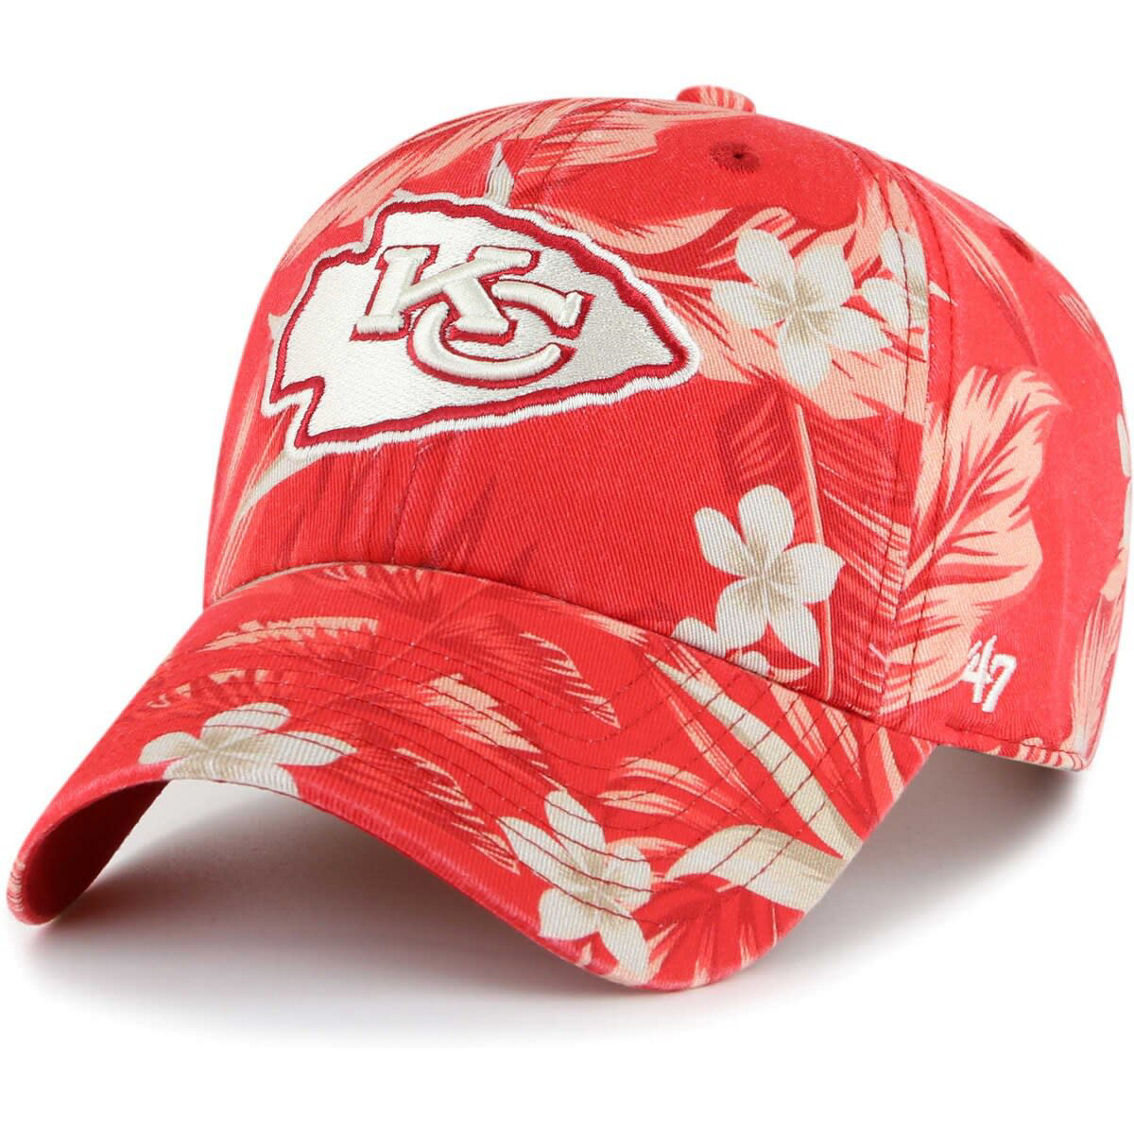 '47 Men's Red Kansas City Chiefs Tropicalia Clean Up Adjustable Hat - Image 2 of 3